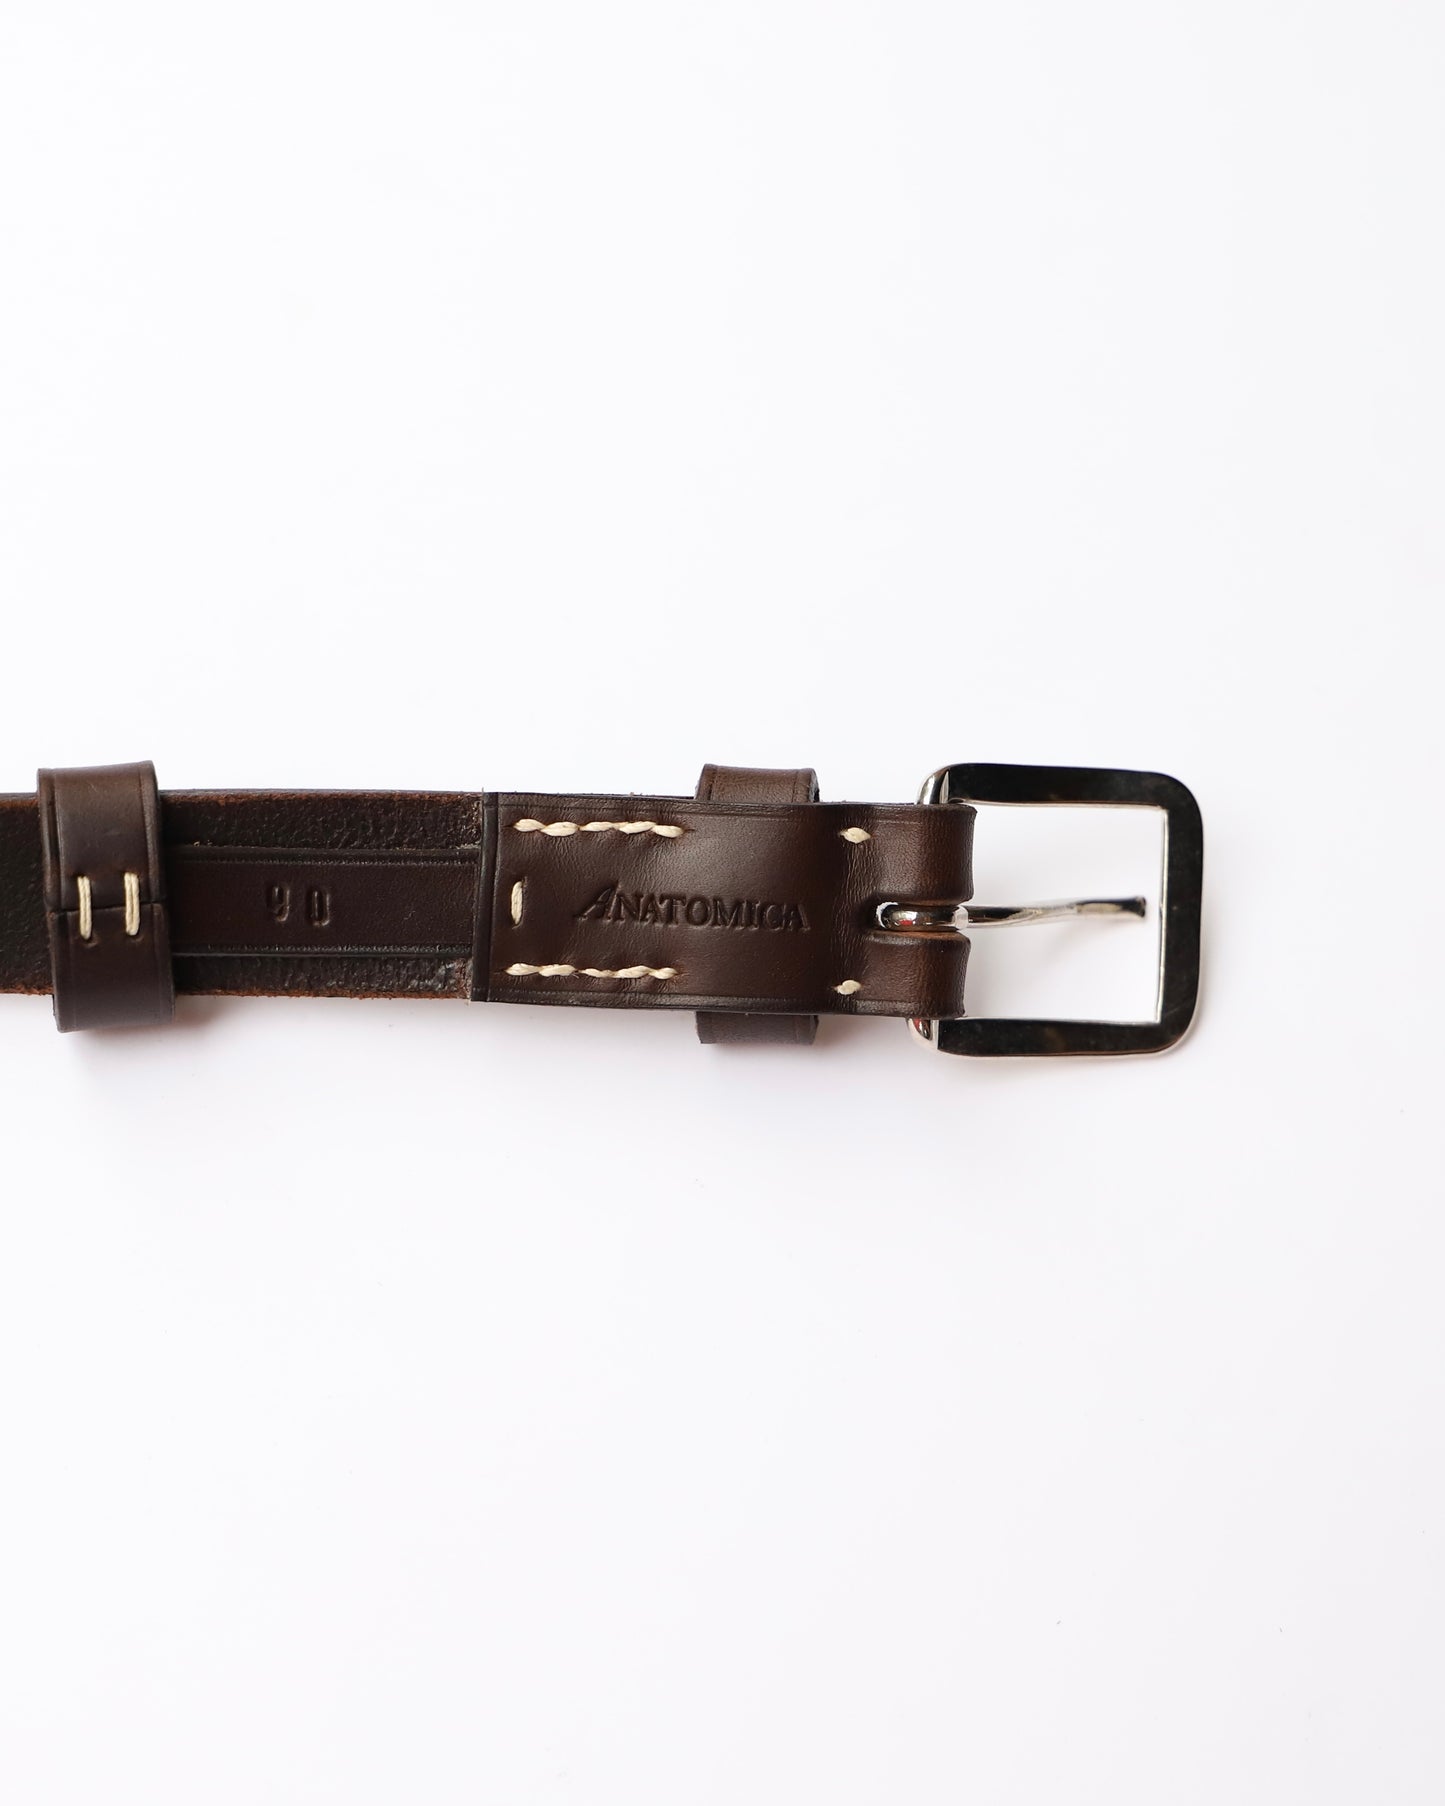 【 23FW新作 】ANATOMICA FRENCH ARMY LEATER BELT / BROWN